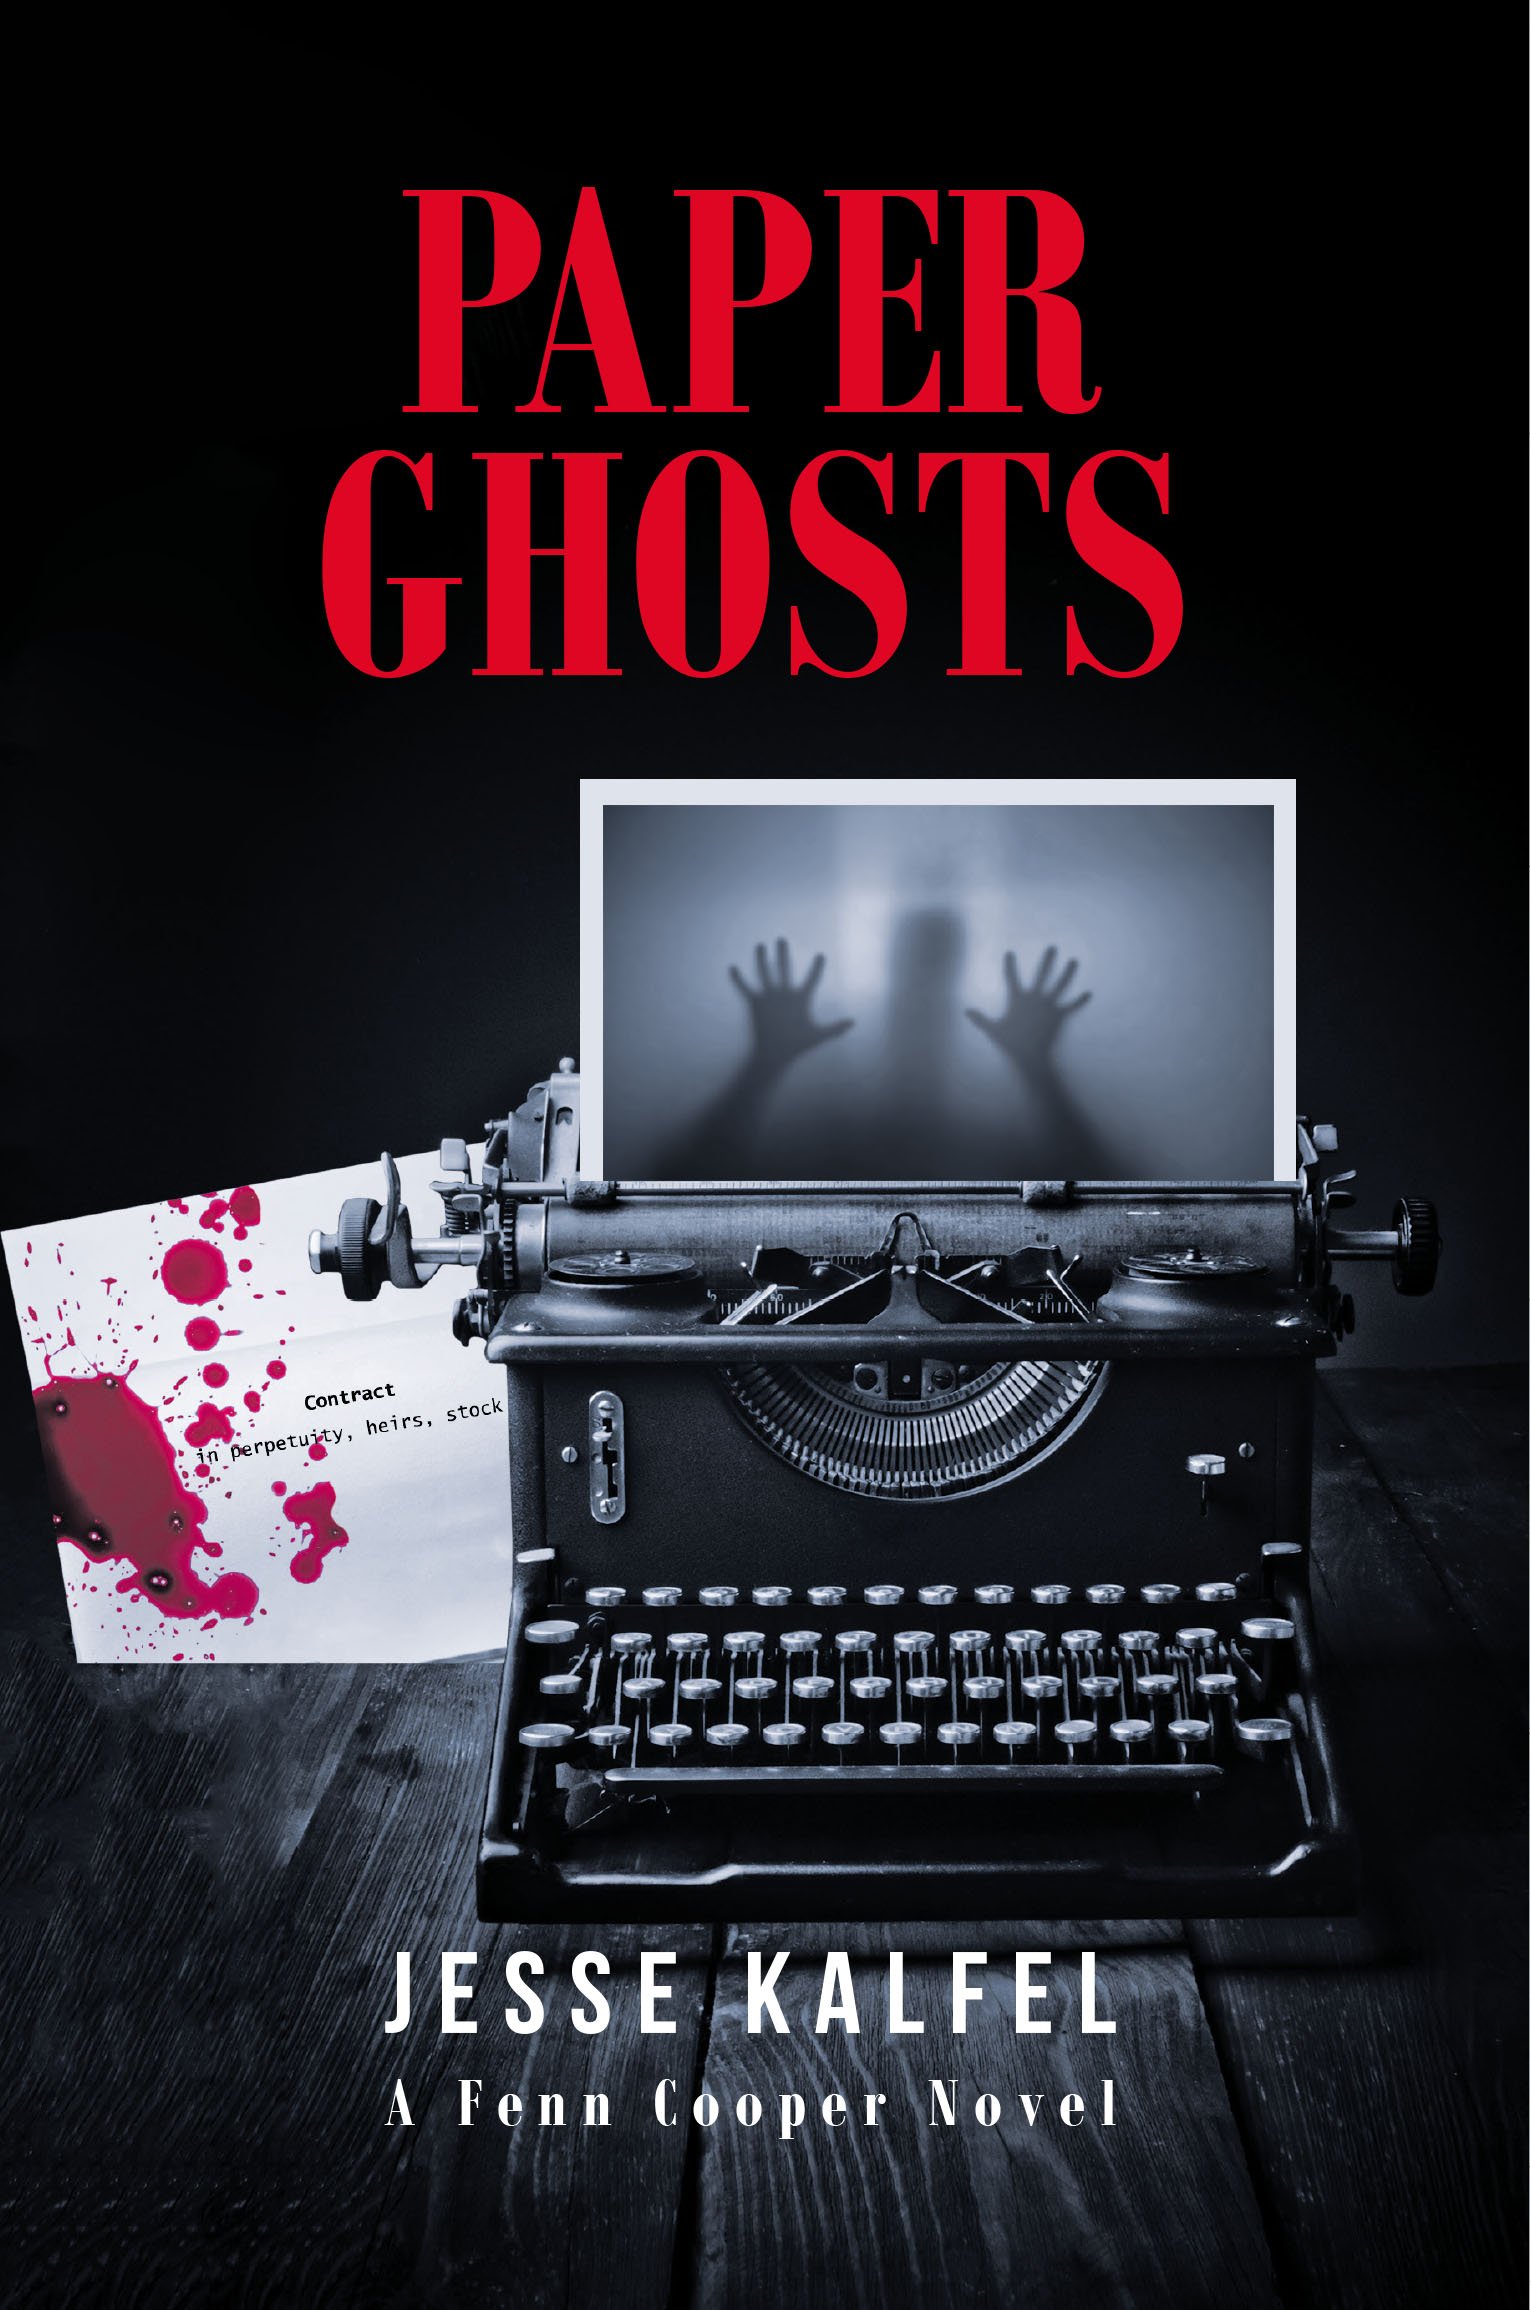 Jesse Kalfel’s New Book, "Paper Ghosts: A Fenn Cooper Novel," Follows a Journalist Who Works to Solve a Series of Grisly Murders Before His New Friends End Up Dead